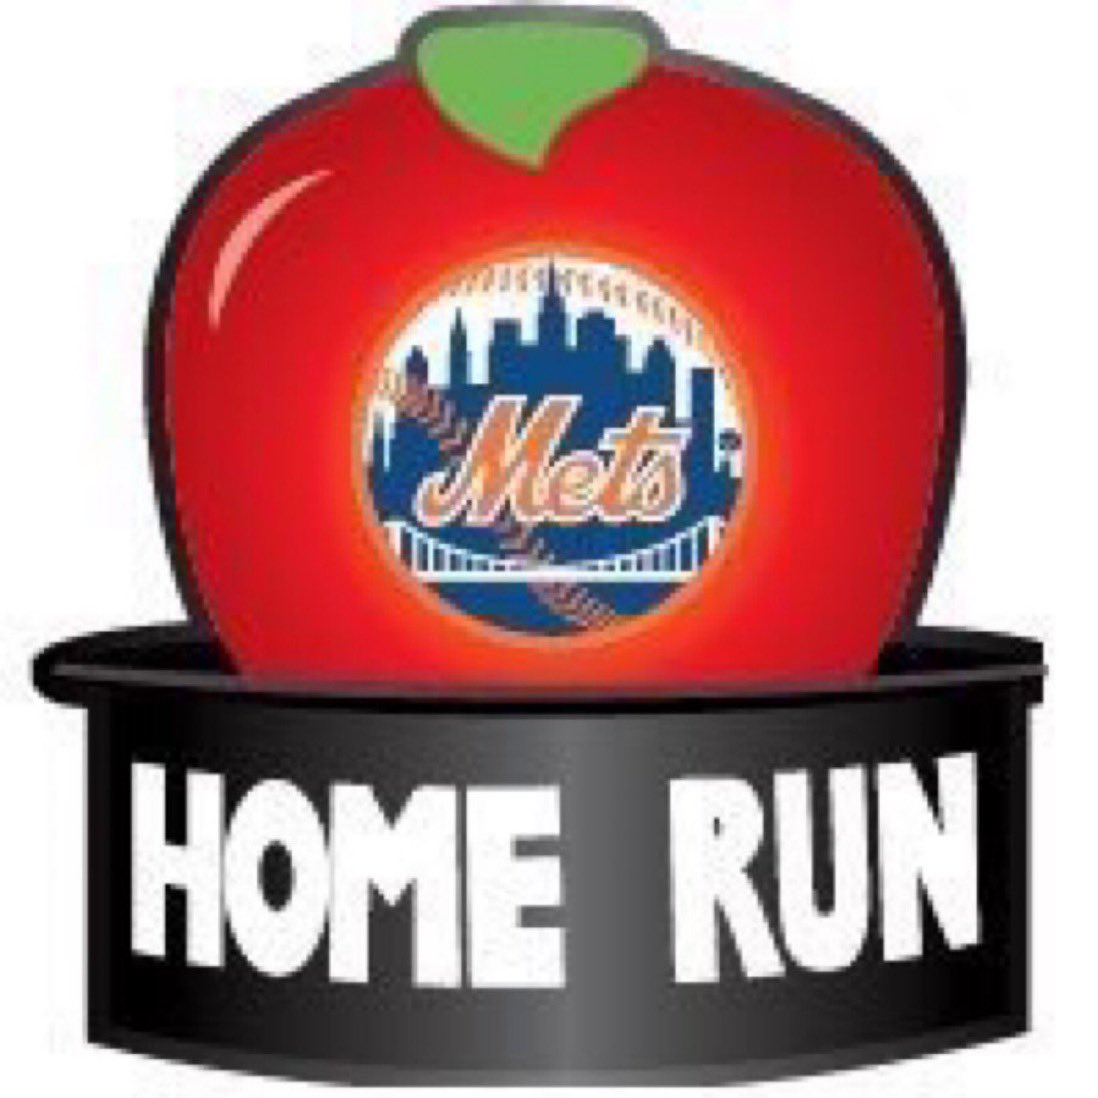 Nimmo!!!!! Boom!!!!! Walkoff win!!!! The Mets are back, baby!!!!! Woohoo!!!!!!!!! #Mets #LGM